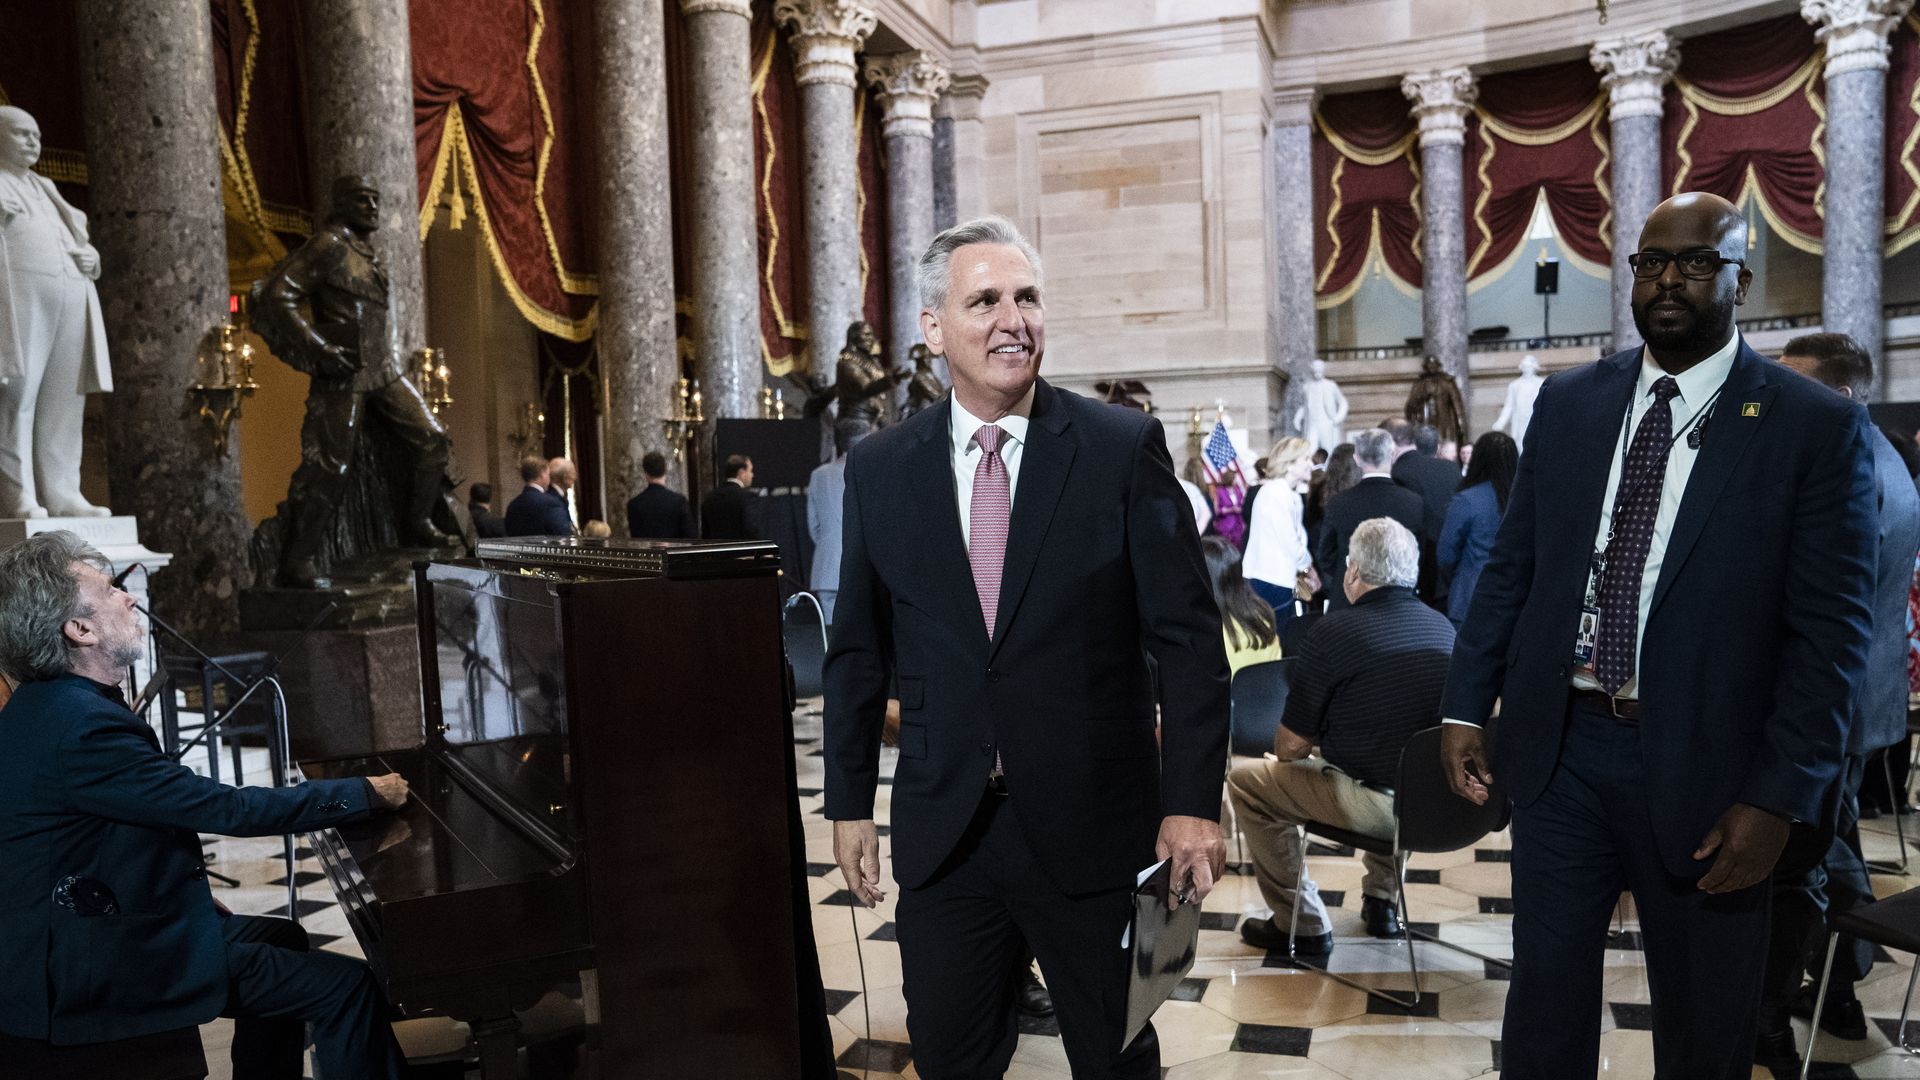 House Minority Leader Kevin McCarthy, wearing a dark gray suit, white shirt and red-and-white tie, attends a memorial service in the Capitol's statuary hall.